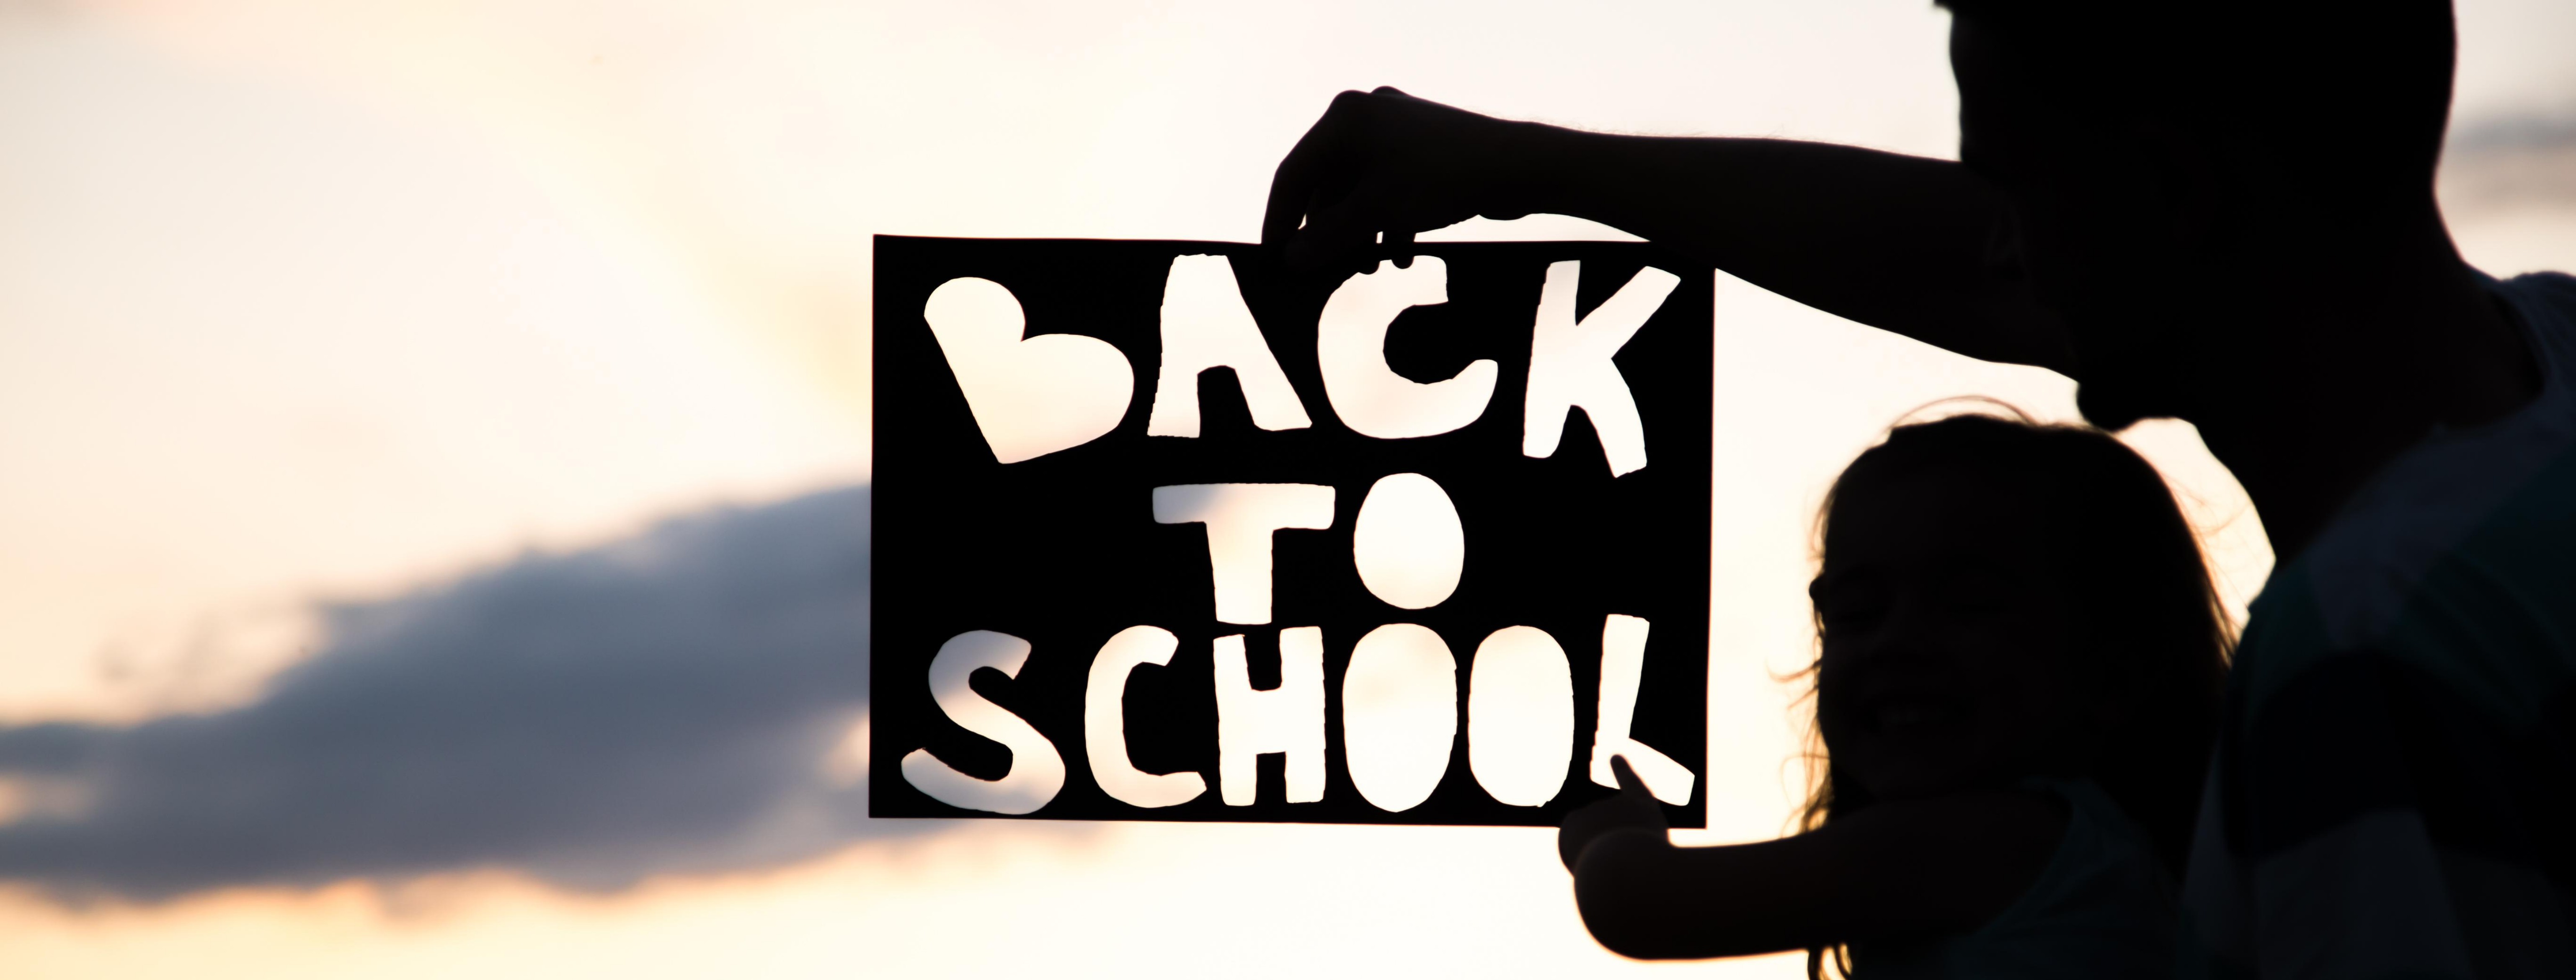 Get ready to kick off the new school year with our Back to School Night! This adult-only event is an opportunity to meet your child’s teachers, tour the classroom & connect (while physical distancing) with other parents! No need to RSVP, but please try to show up on time. Tuesday September 8th 5:45-6:45PM: Sapling, Birch, […]